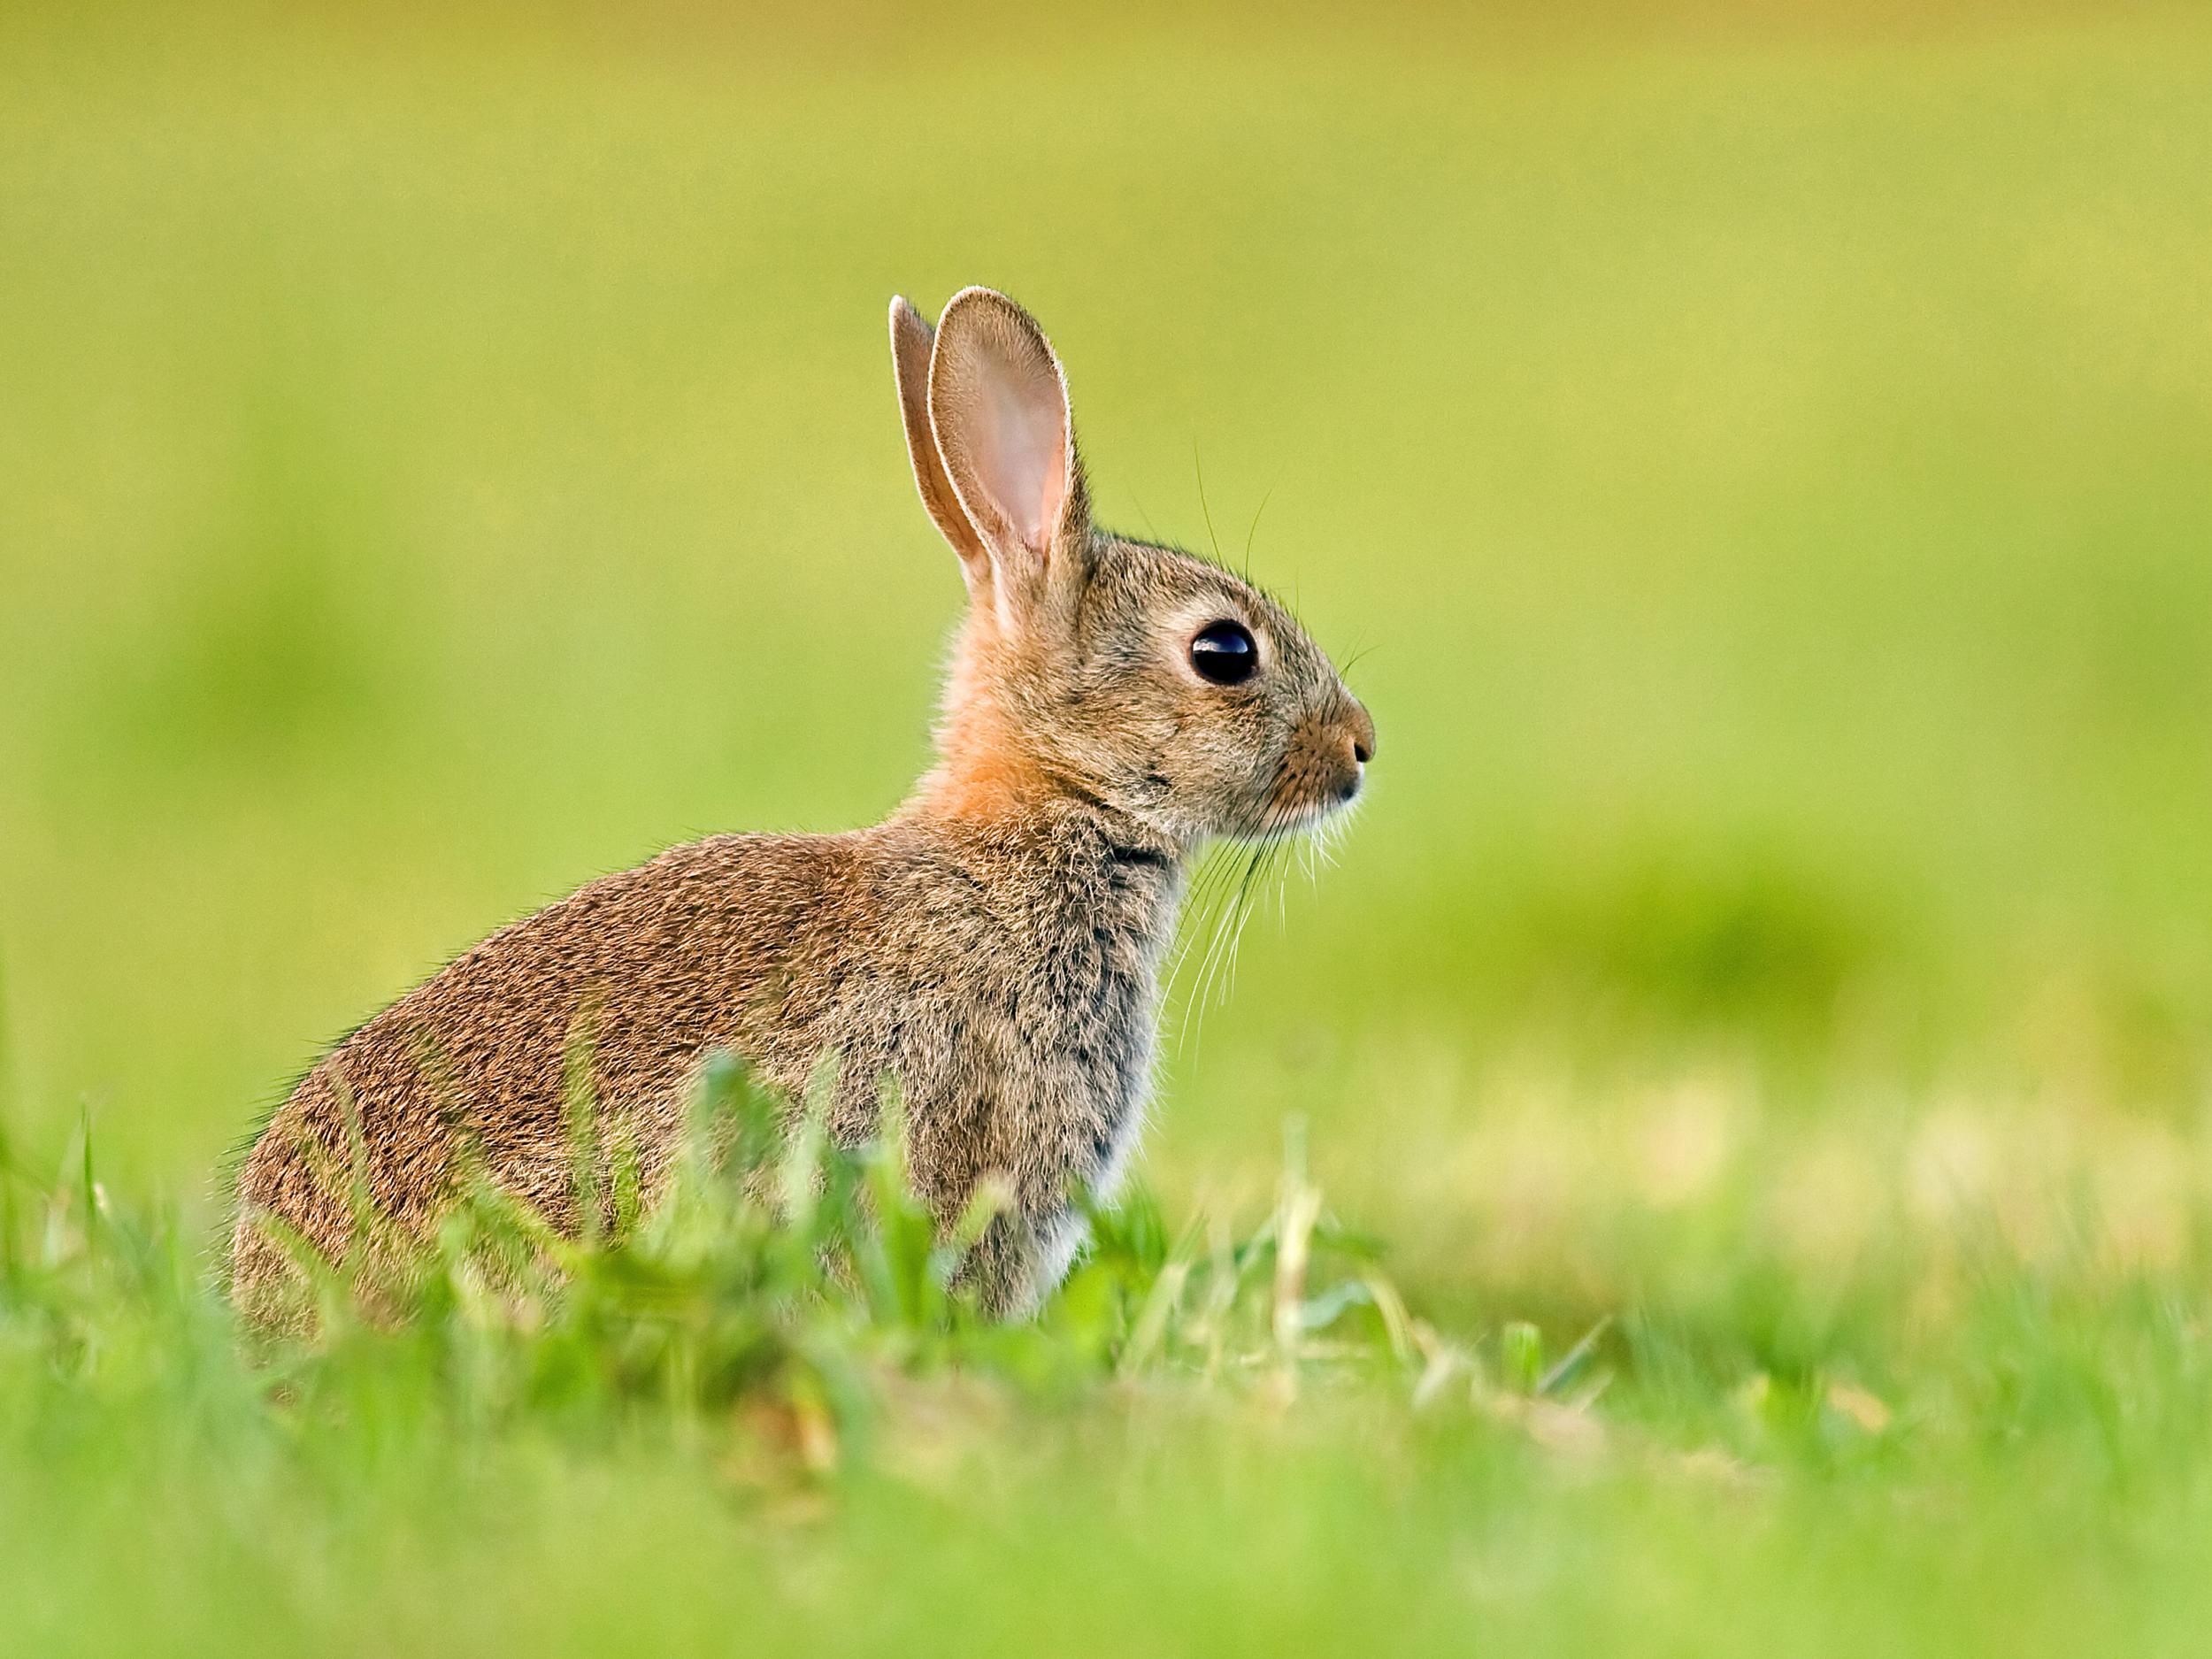 Rabbit populations have declined by 9 per cent since 1995, an effect that may be due to introduced diseases like myxomatosis